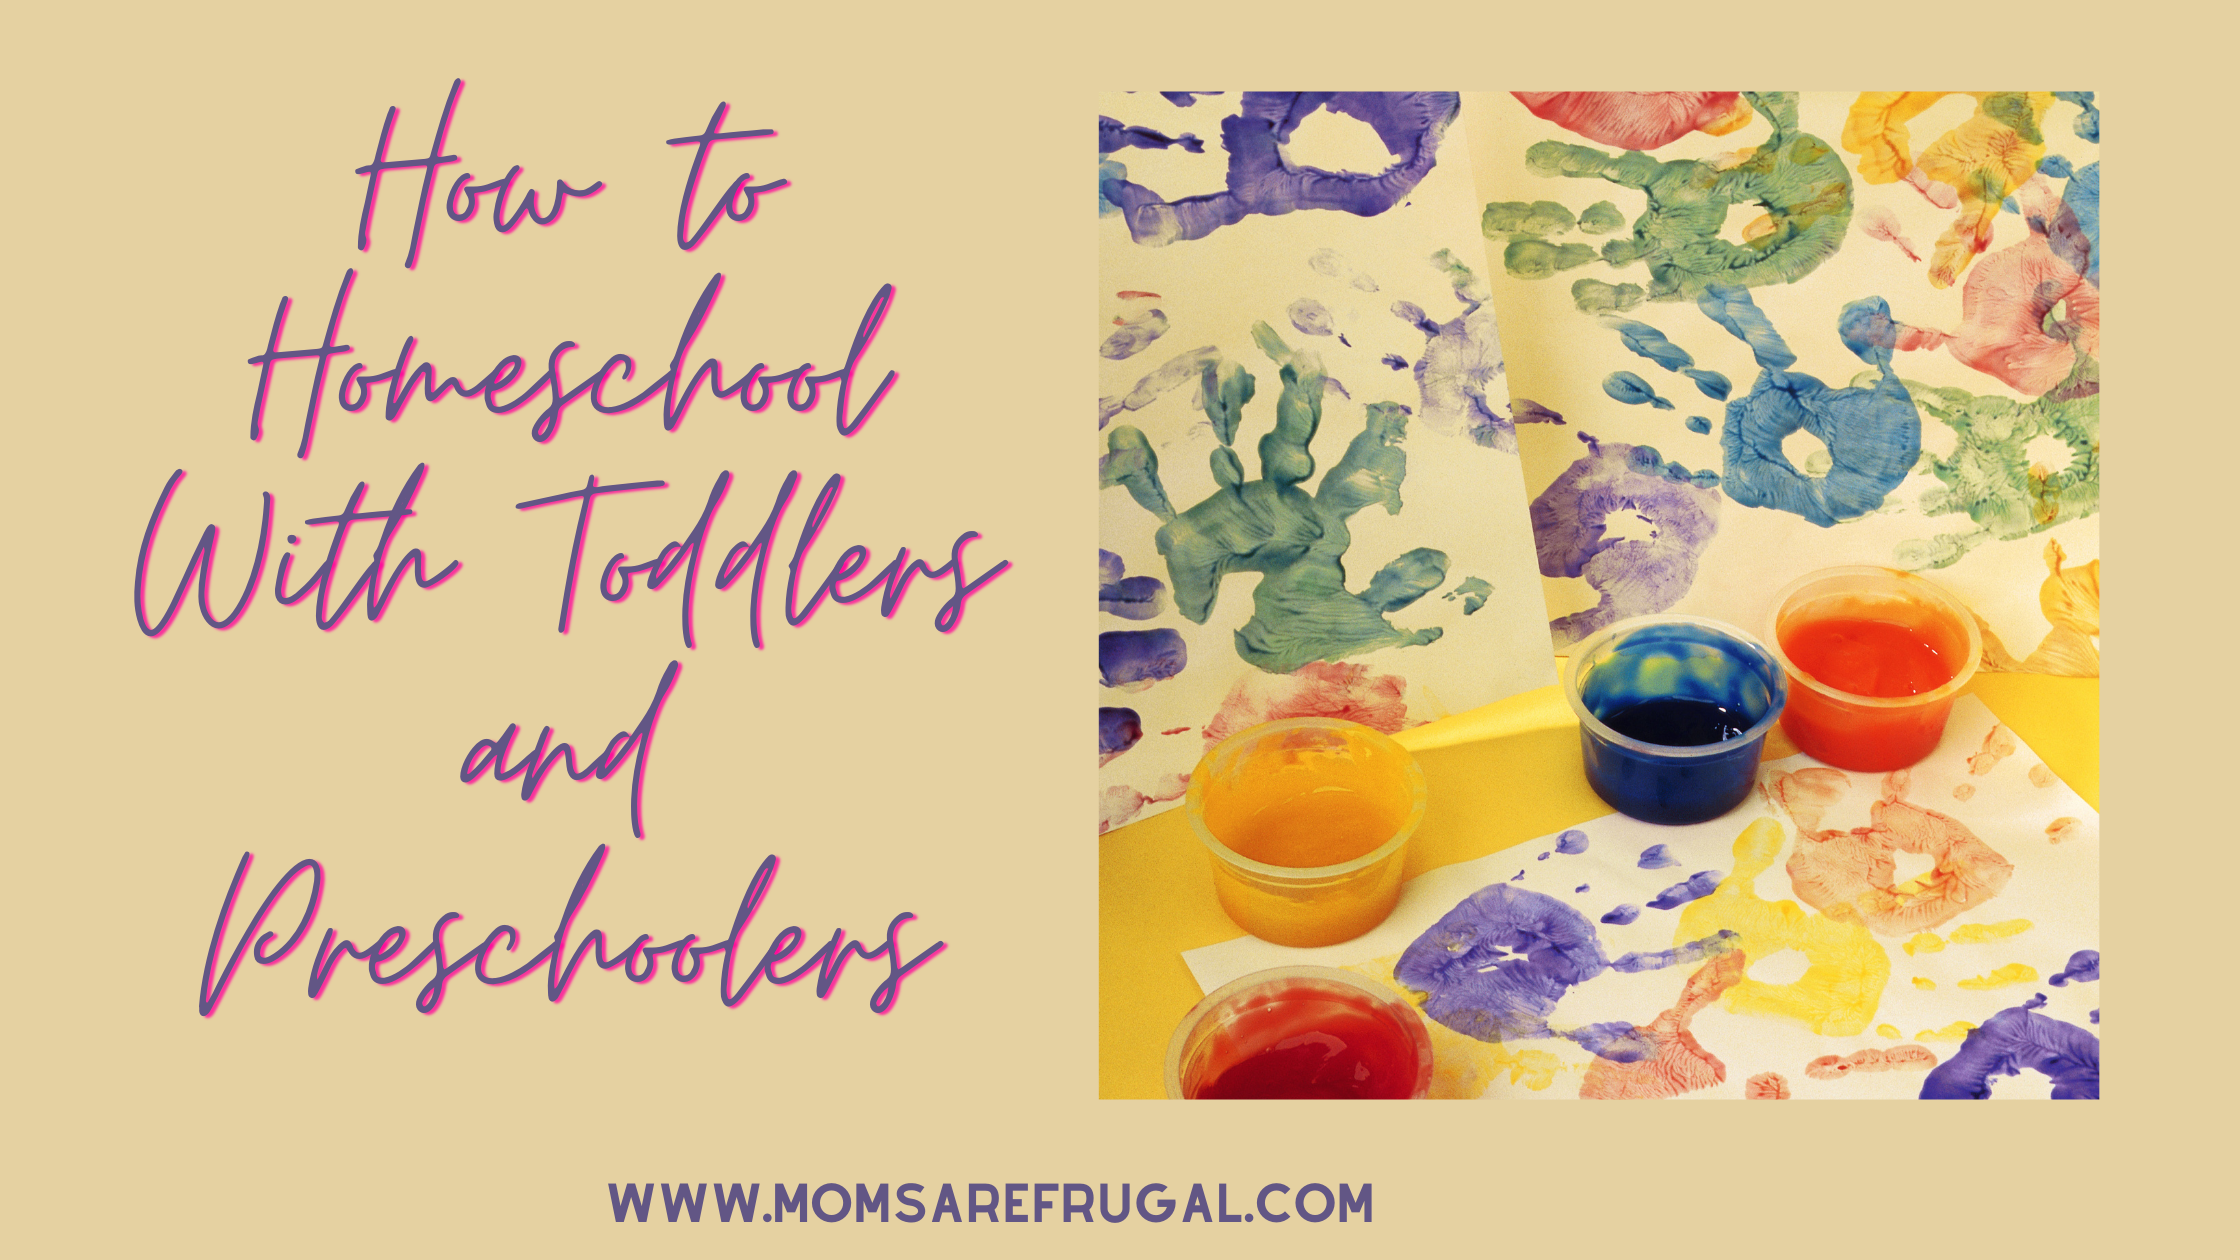 How to Homeschool with Toddlers and Preschoolers